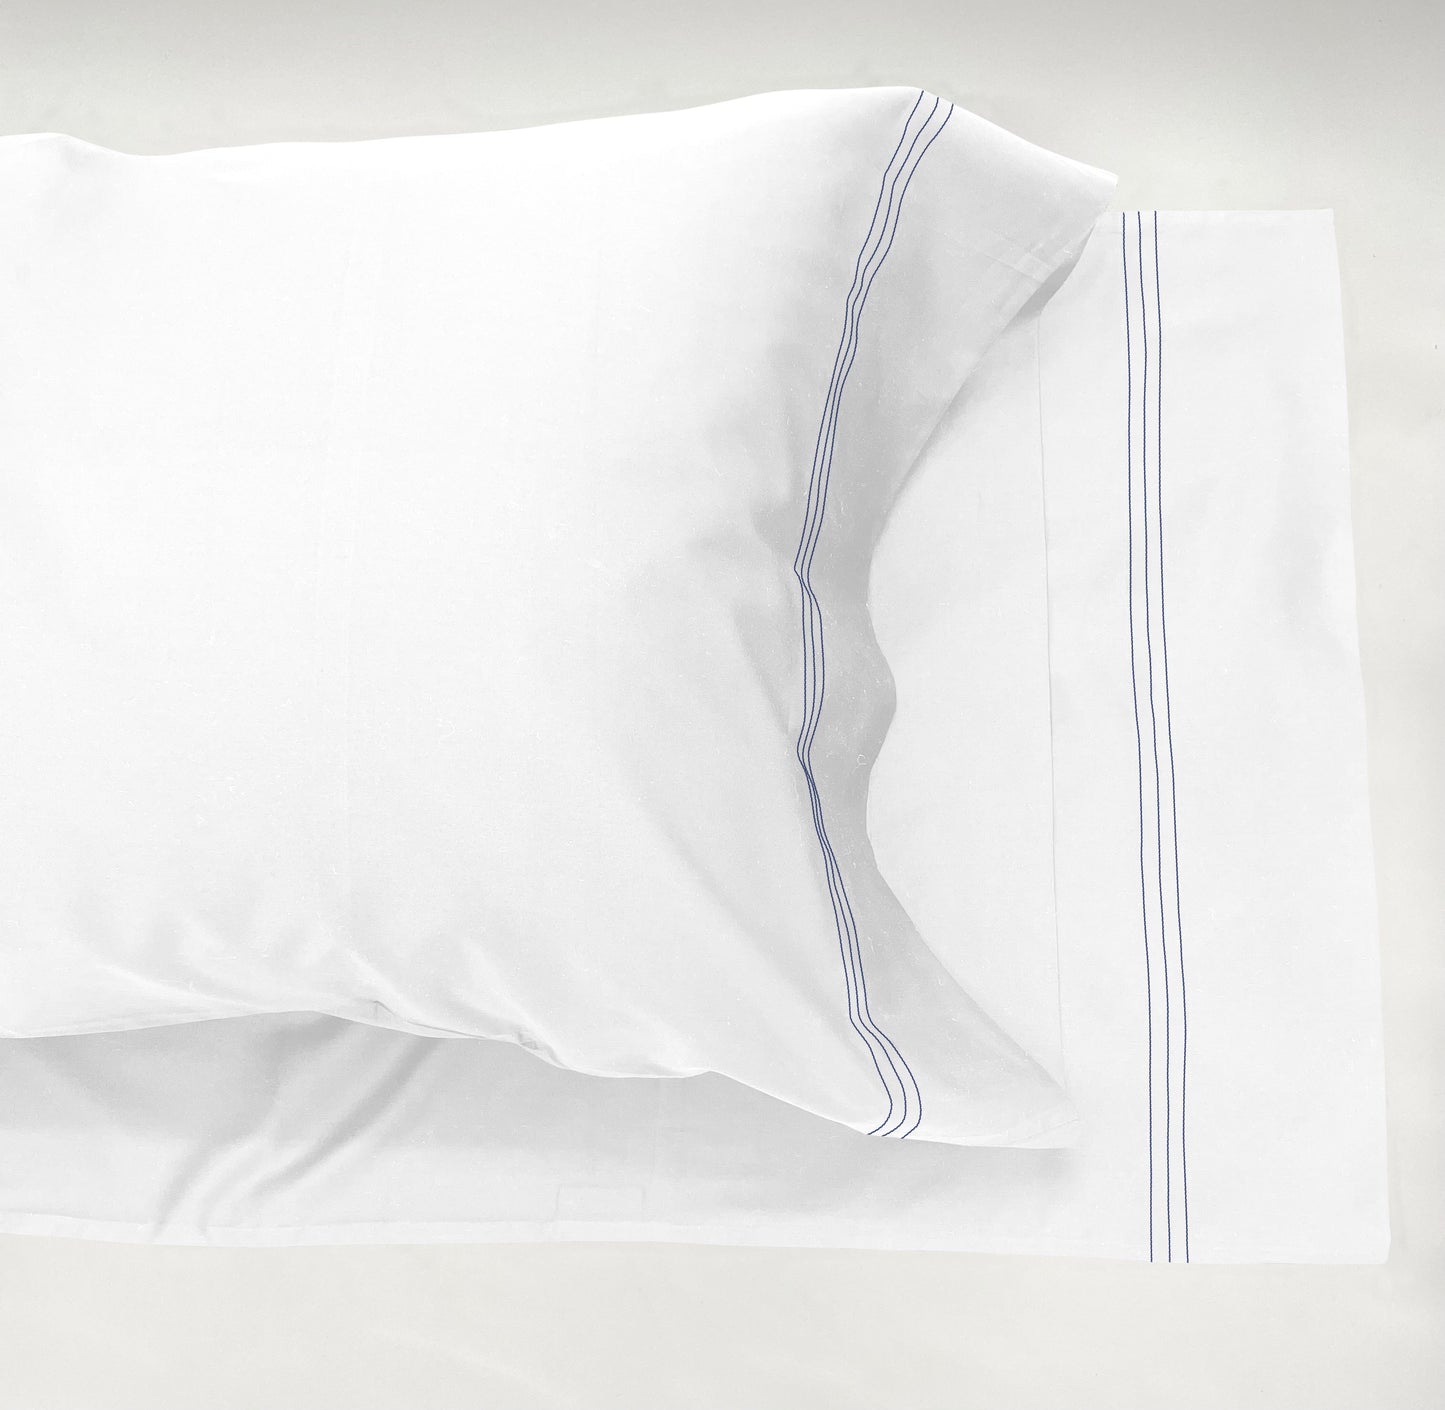 Narragansett White Pillow Case with a triple contrasting stitch in Deep Sea.